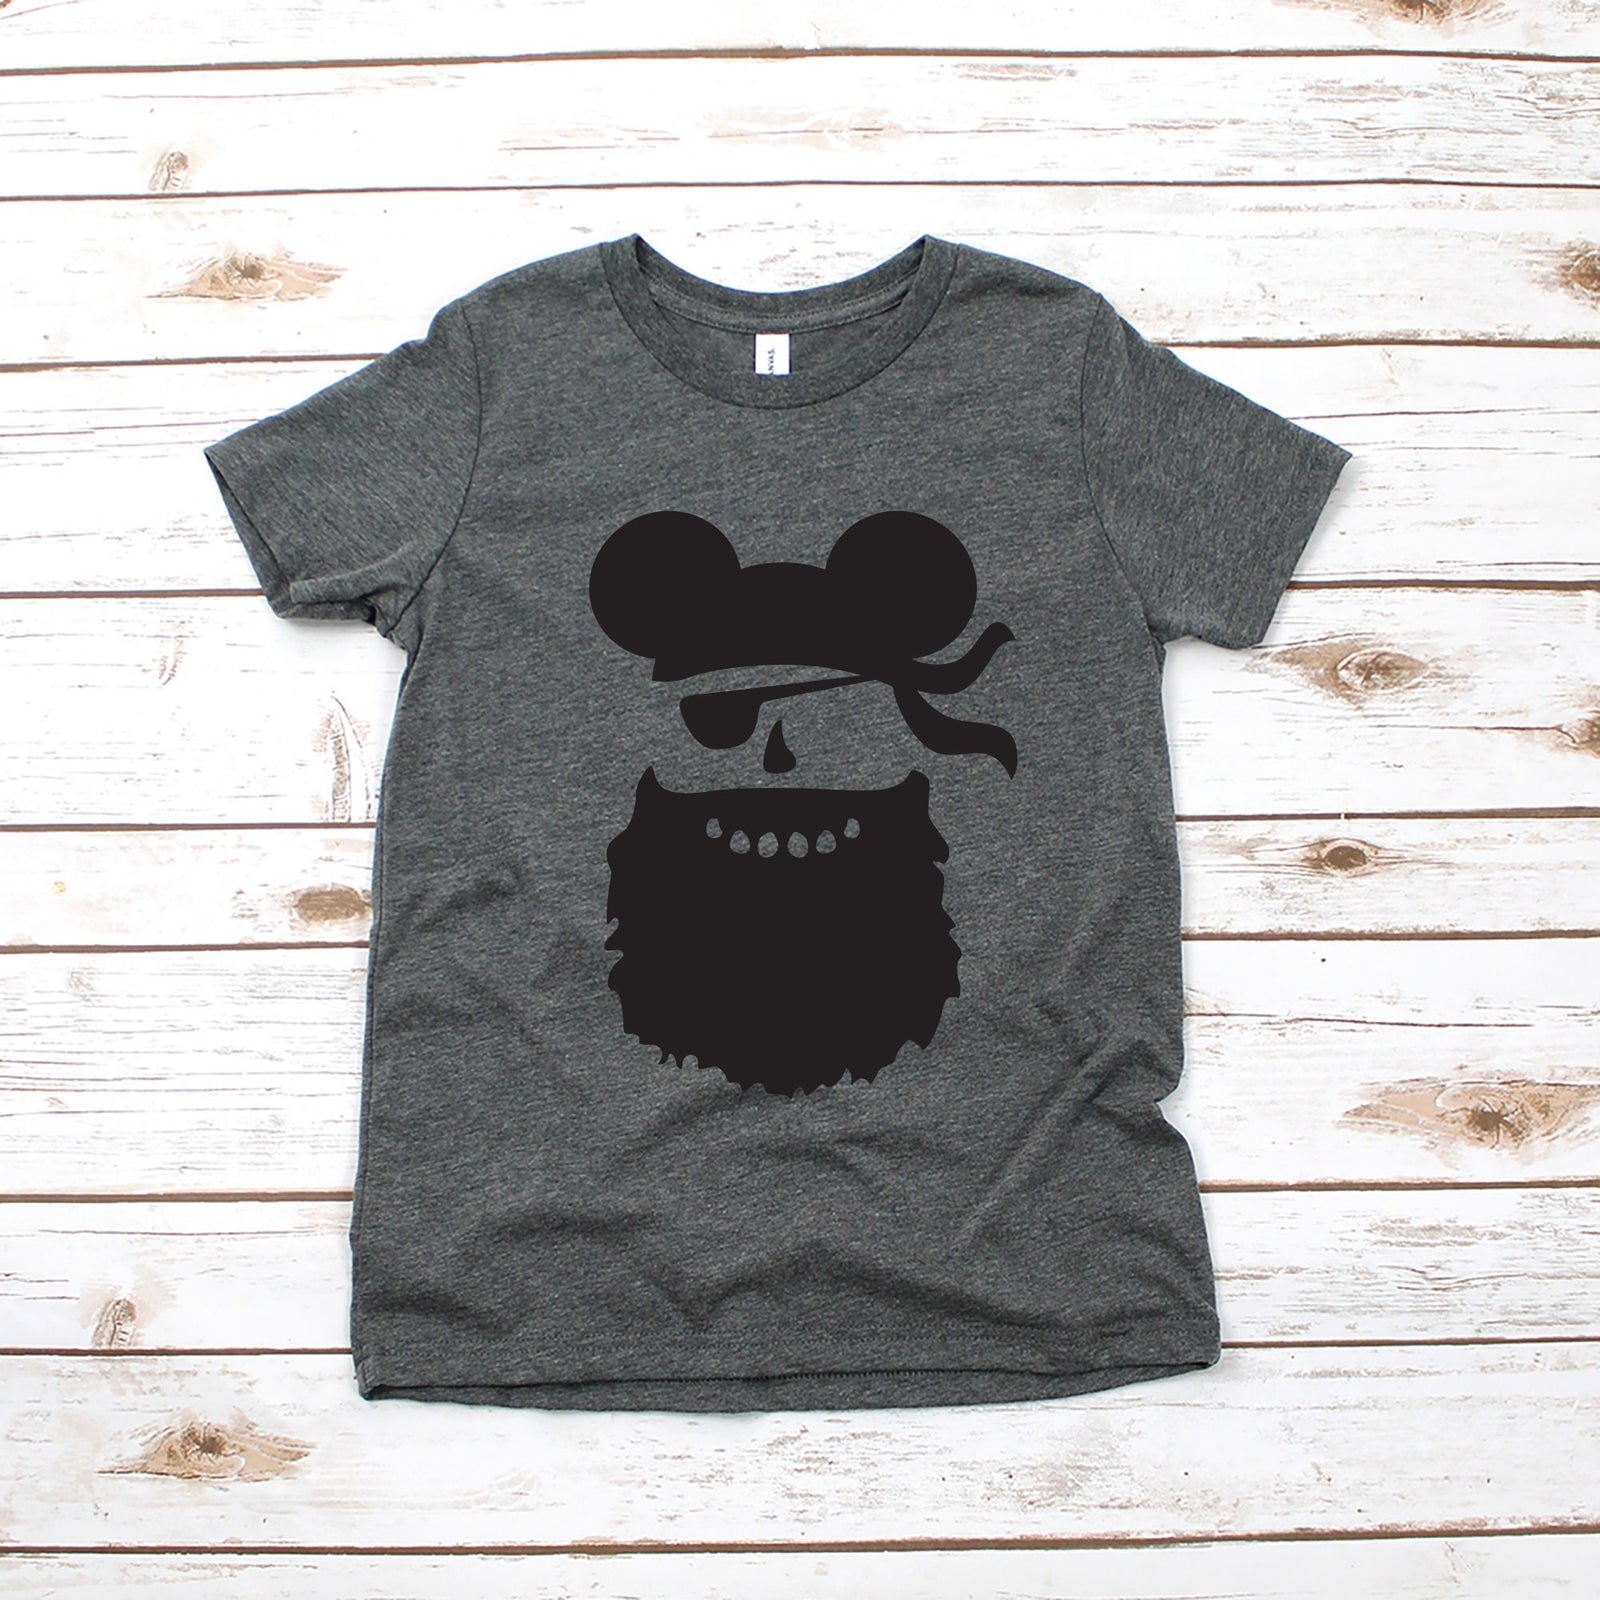 Bearded Pirate Mickey Mouse Youth T Shirt - Disney Kids Mickey T Shirts - Disney Matching Family Shirts - Ahoy - Pirate's Life